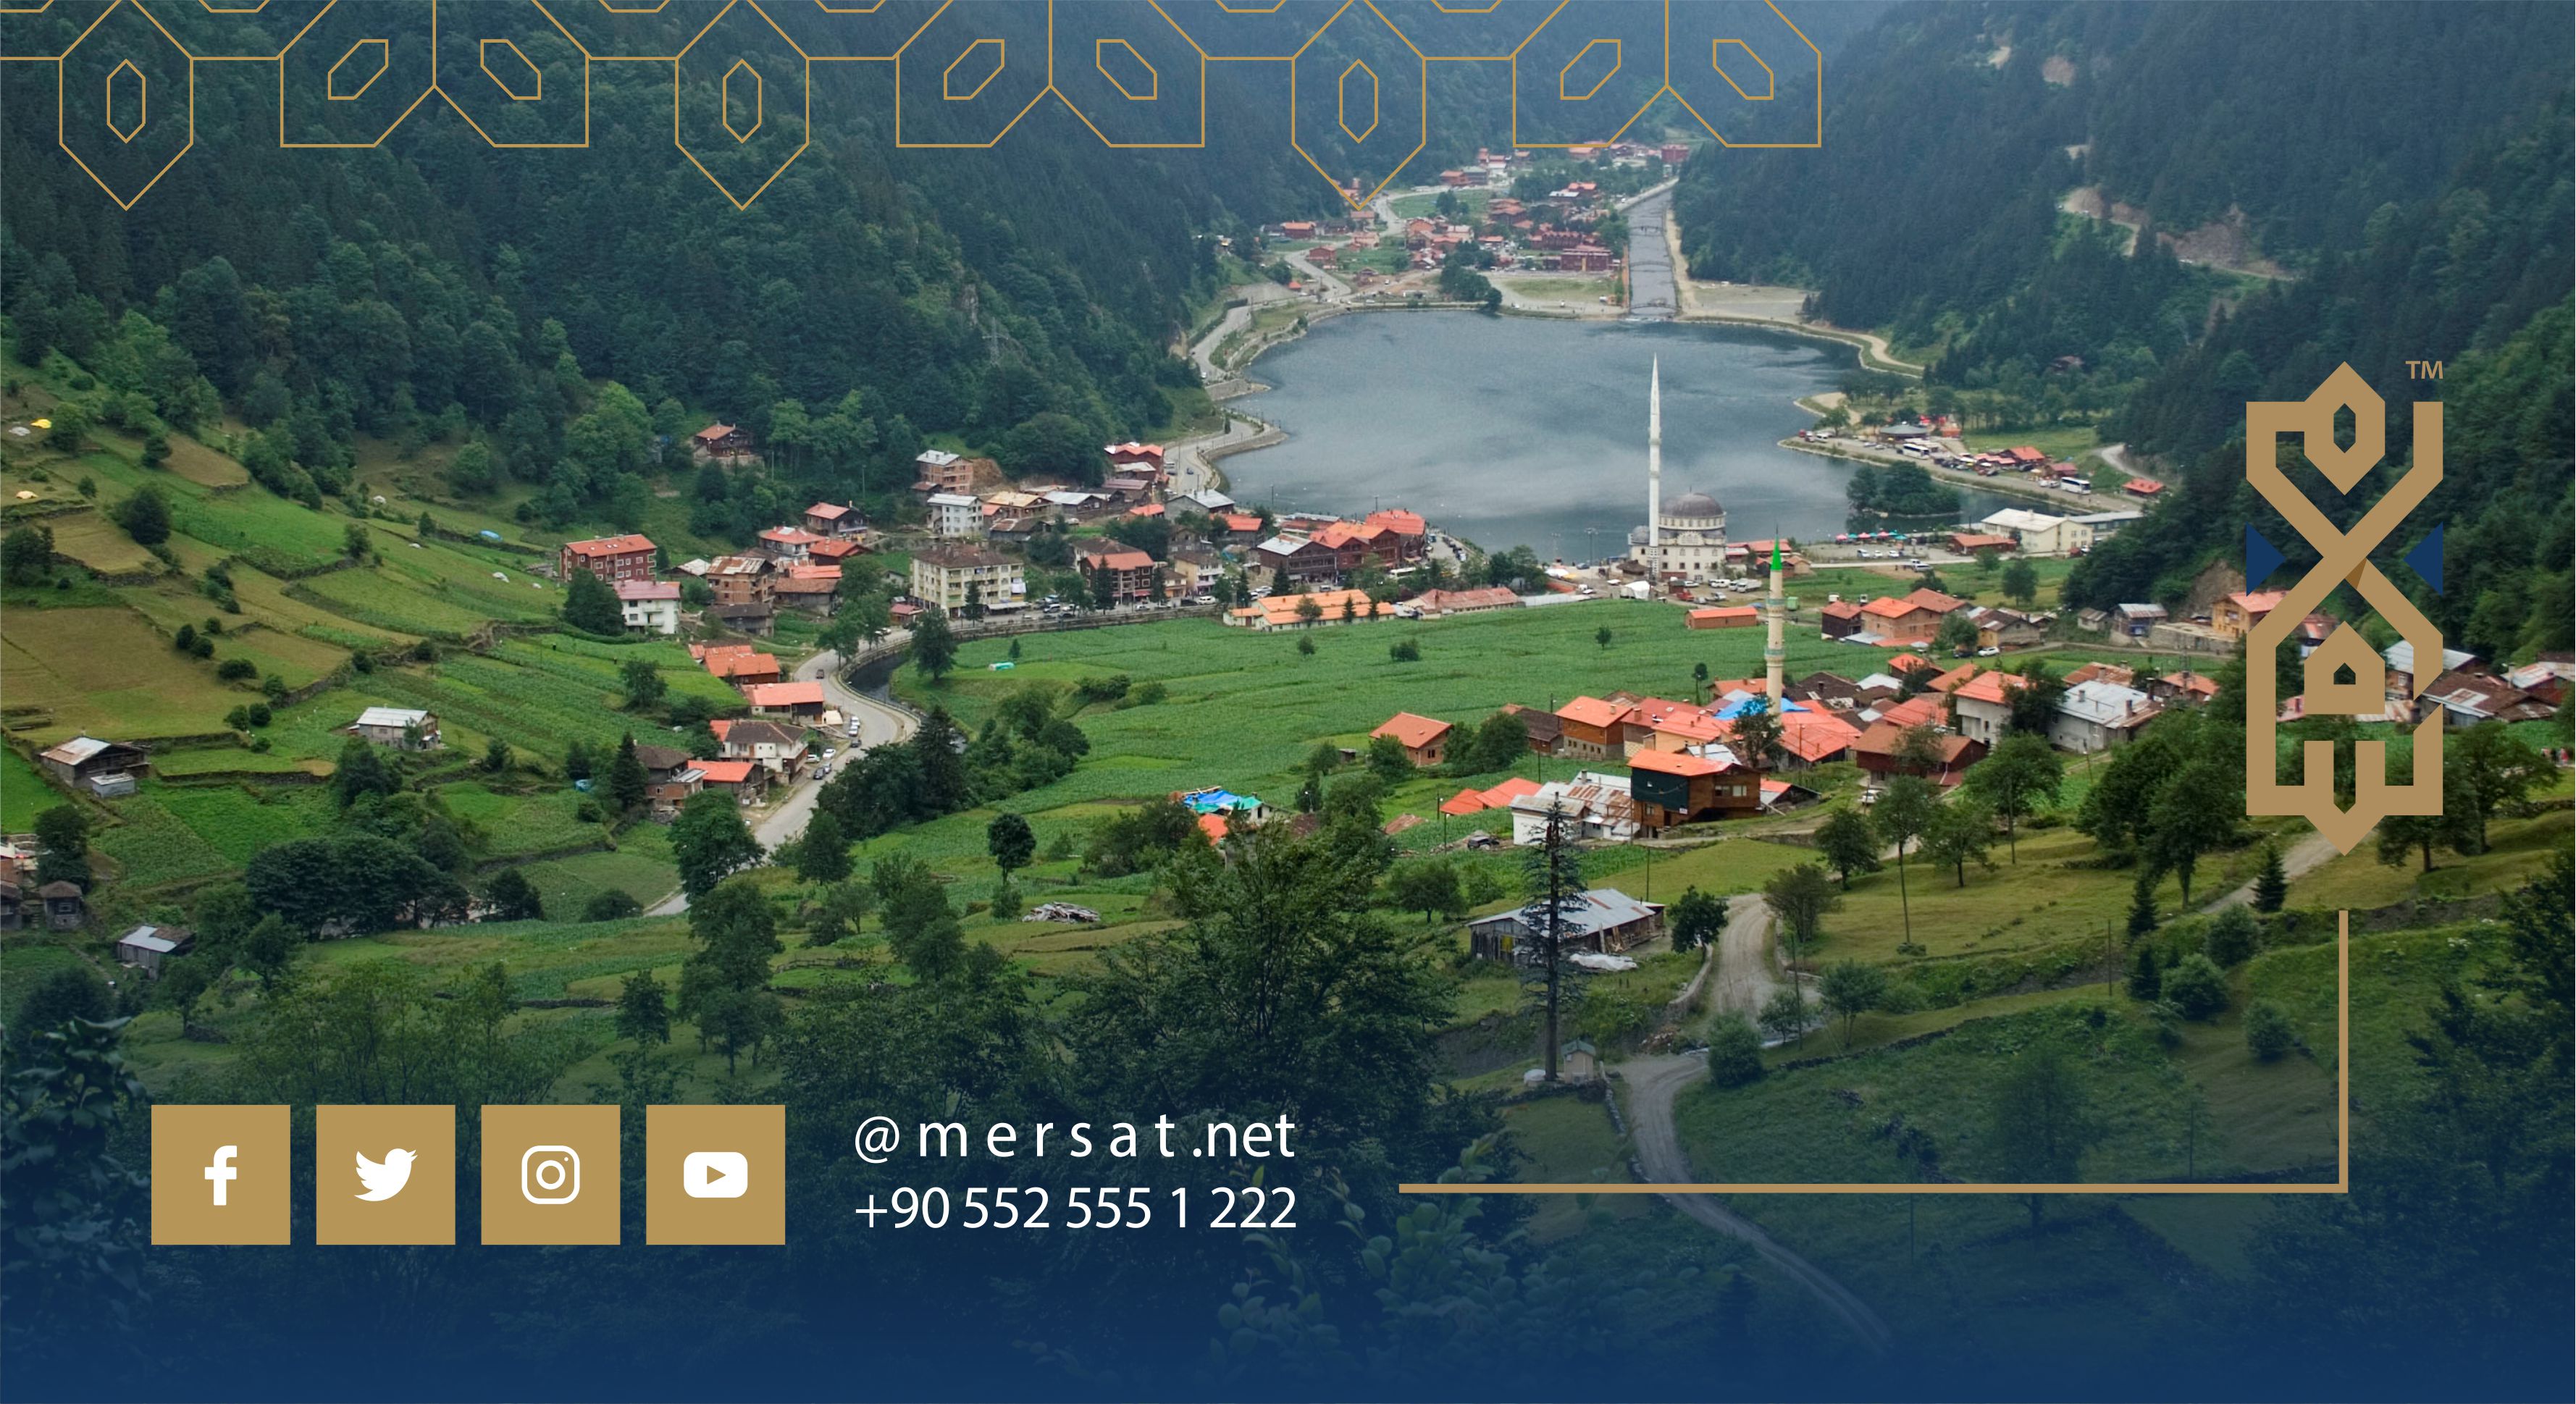 Trabzon is God's heaven on earth and a destination for Arab investors and tourists